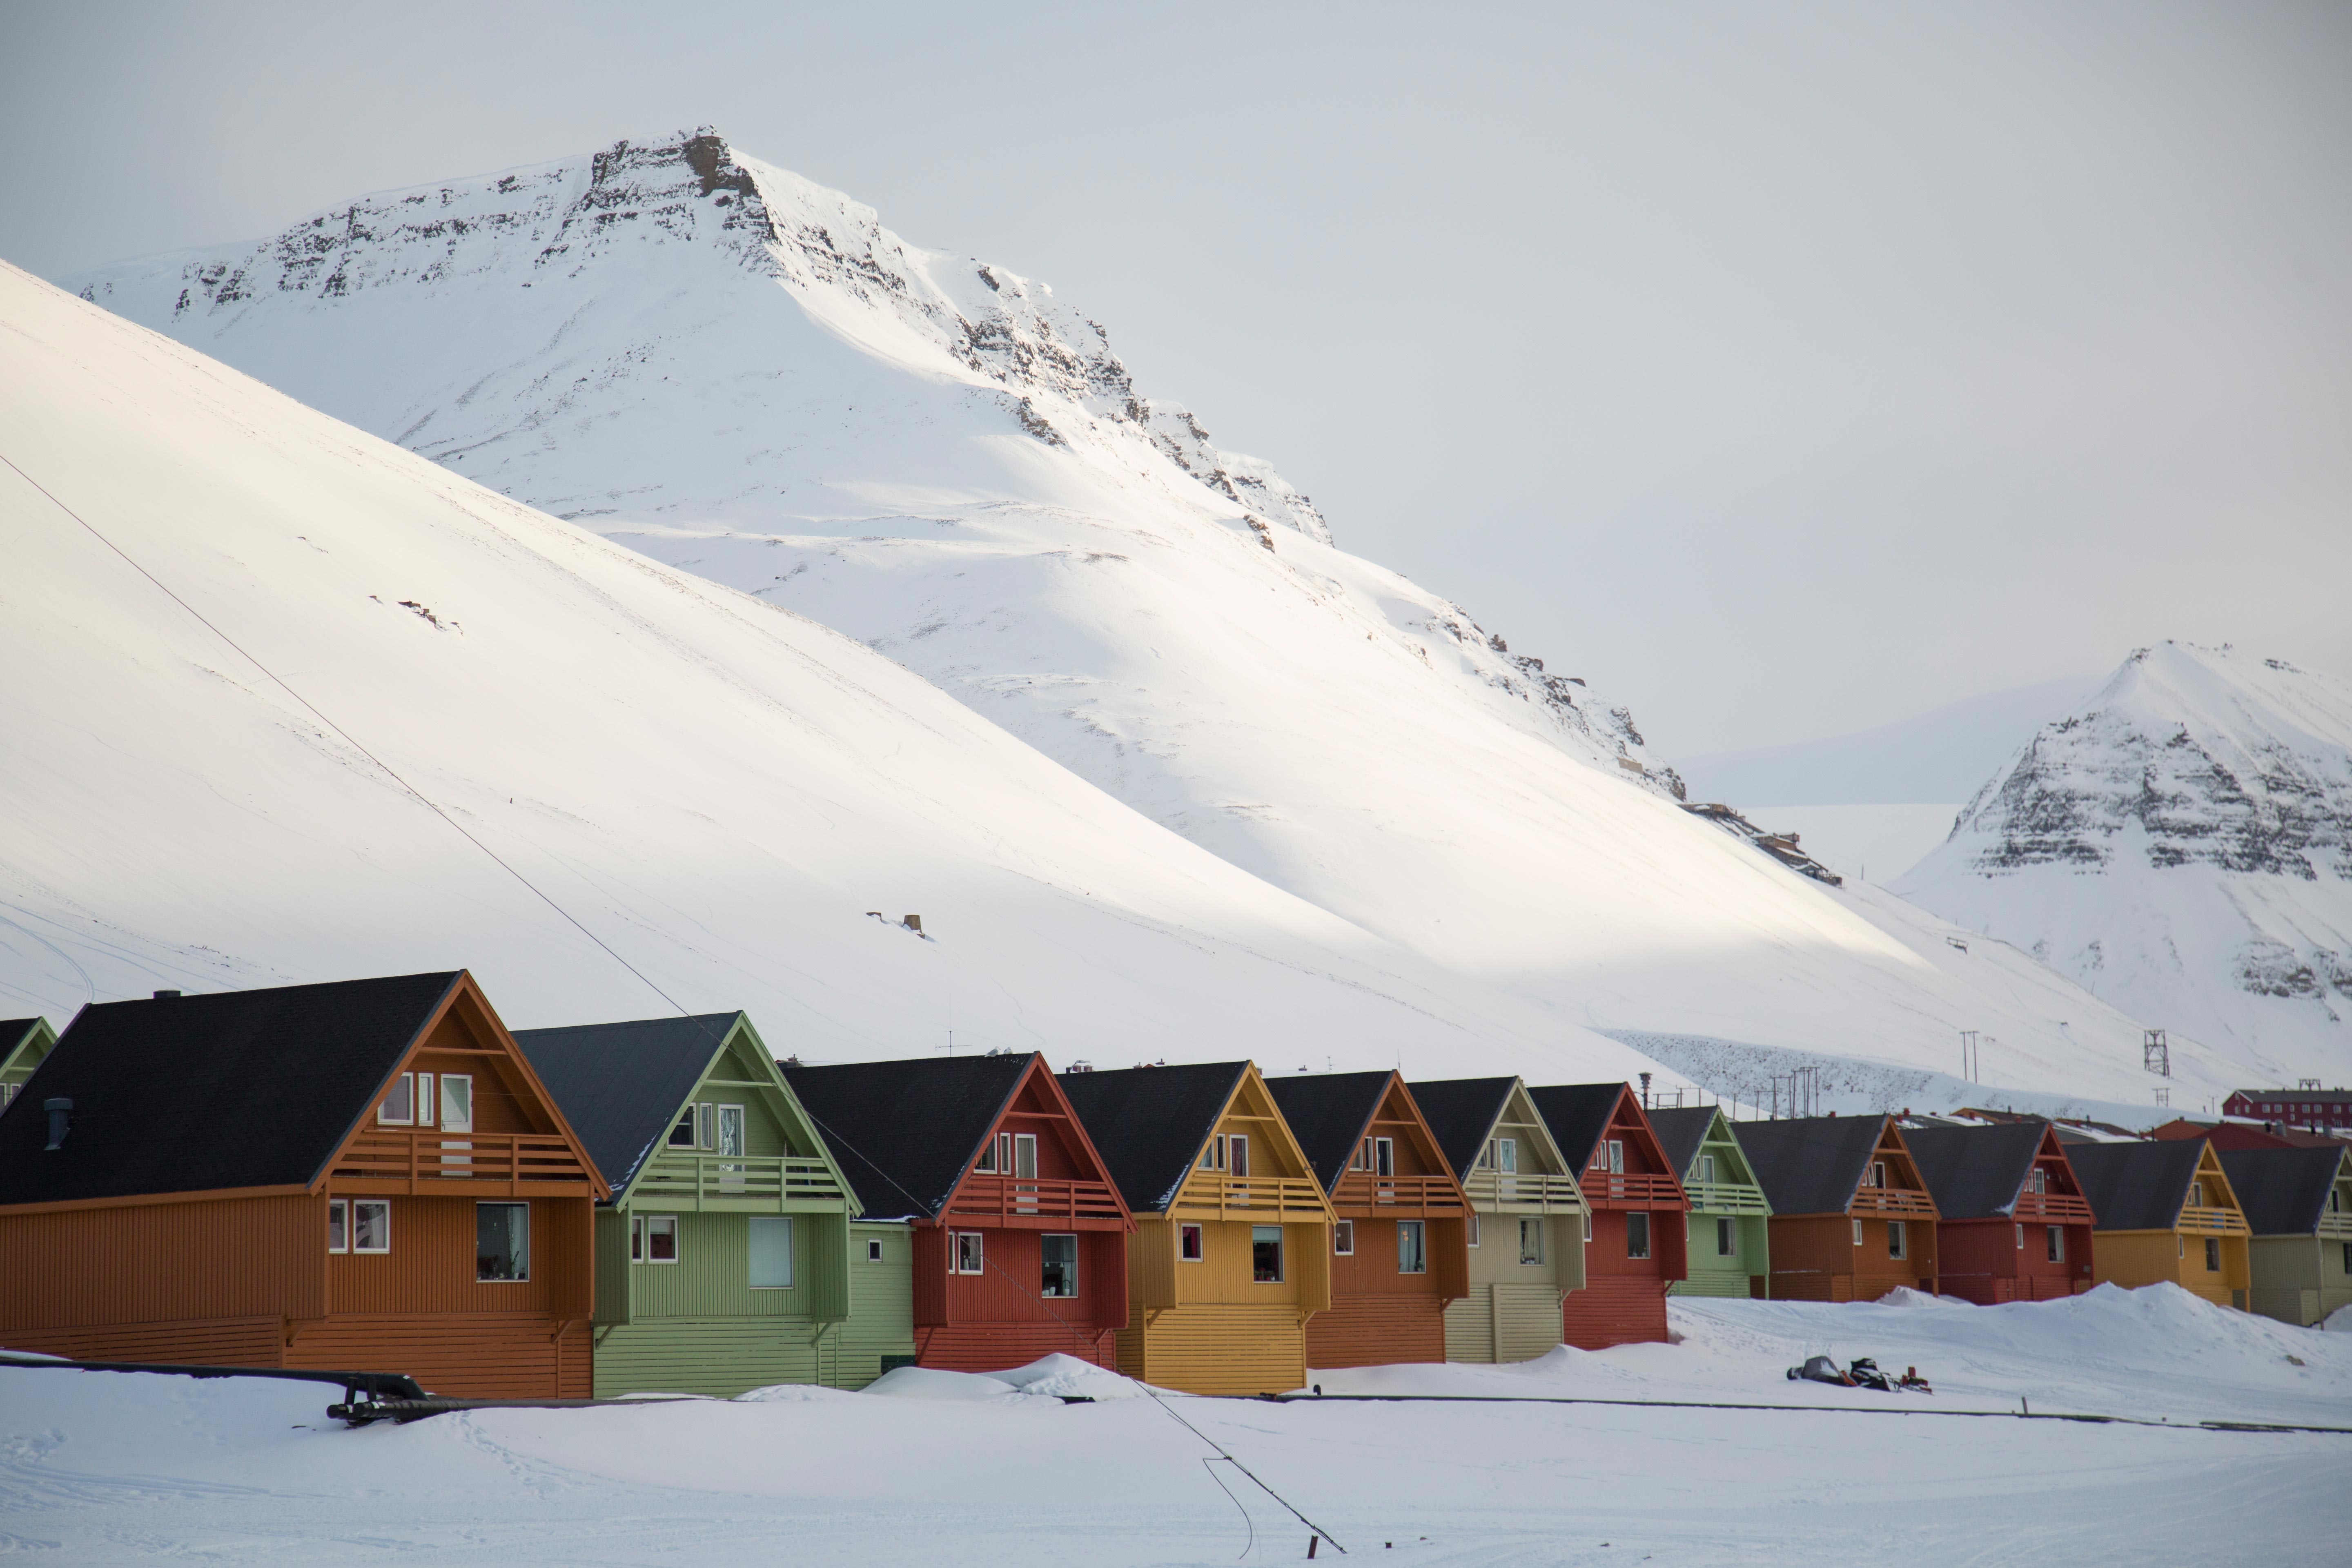 See the colorful of Longyearbyen before embarking on your Spitsbergen voyage.